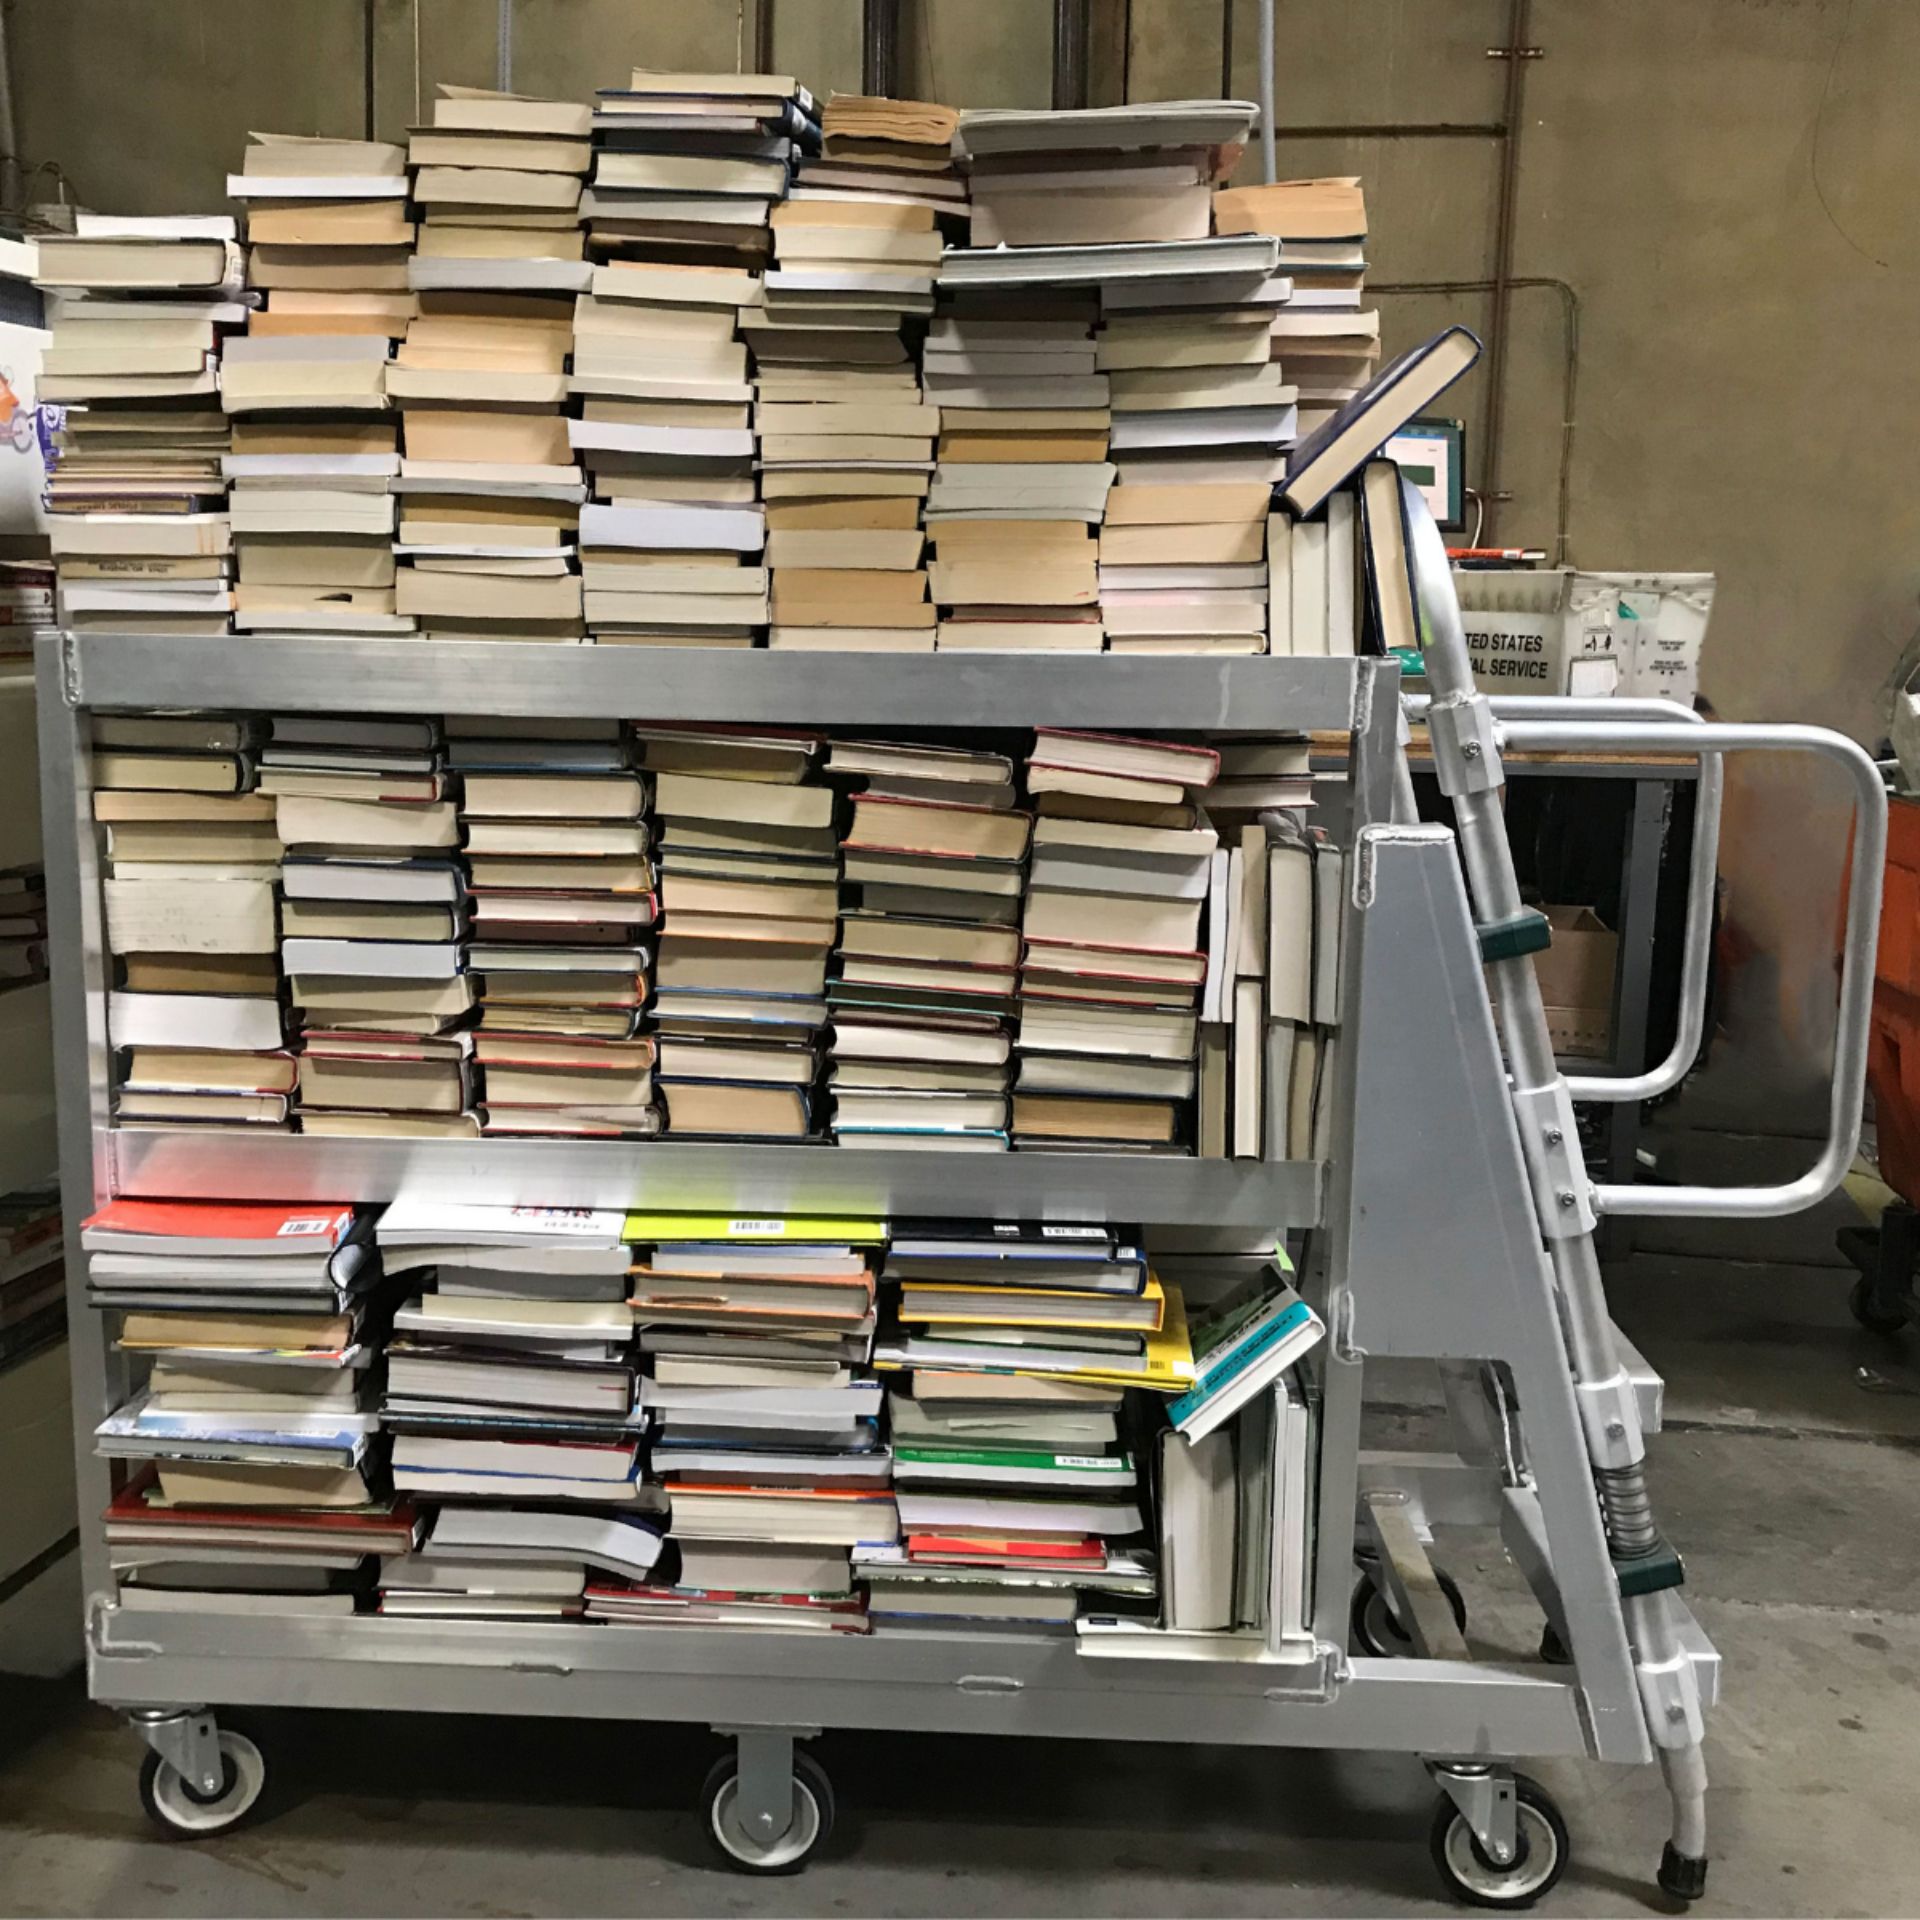 Ladder Carts – In-Use